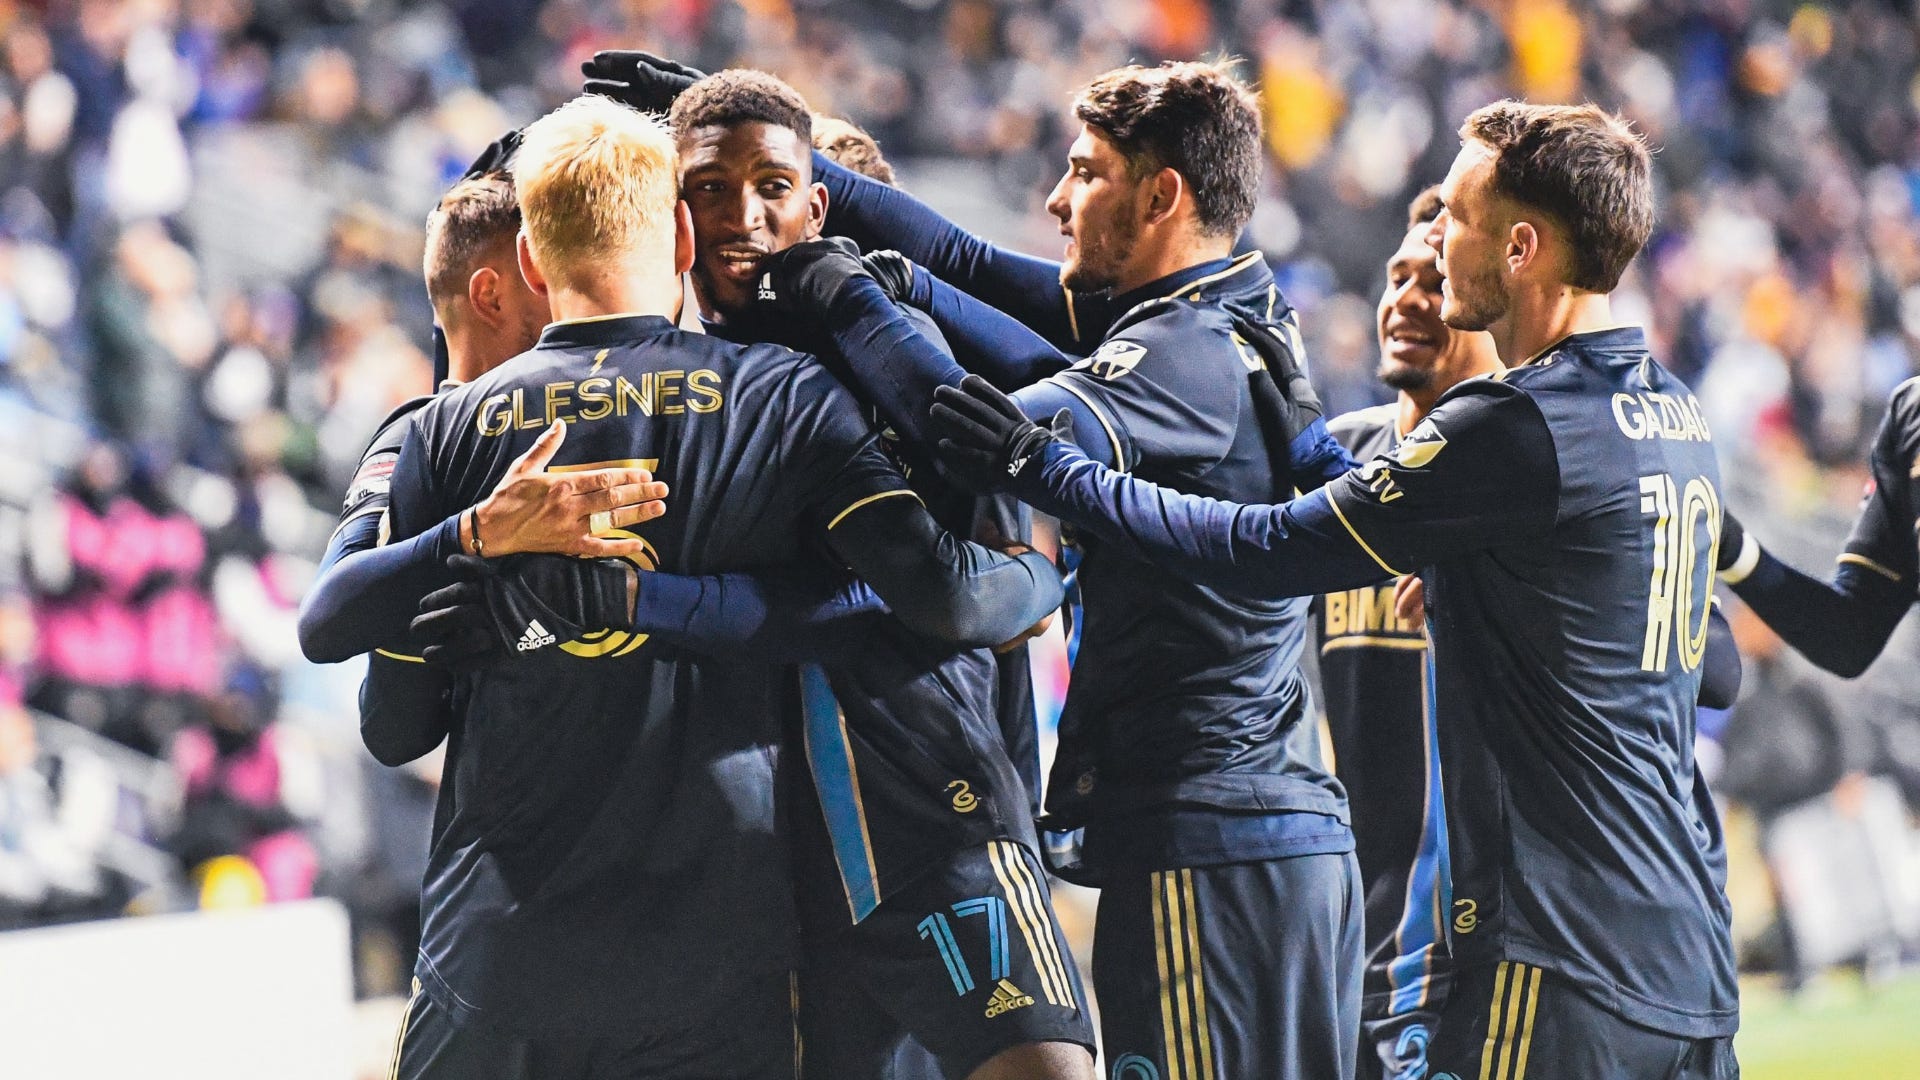 Philadelphia Union vs Atlas Where to watch the match online, live stream, TV channels and kick-off time Goal US